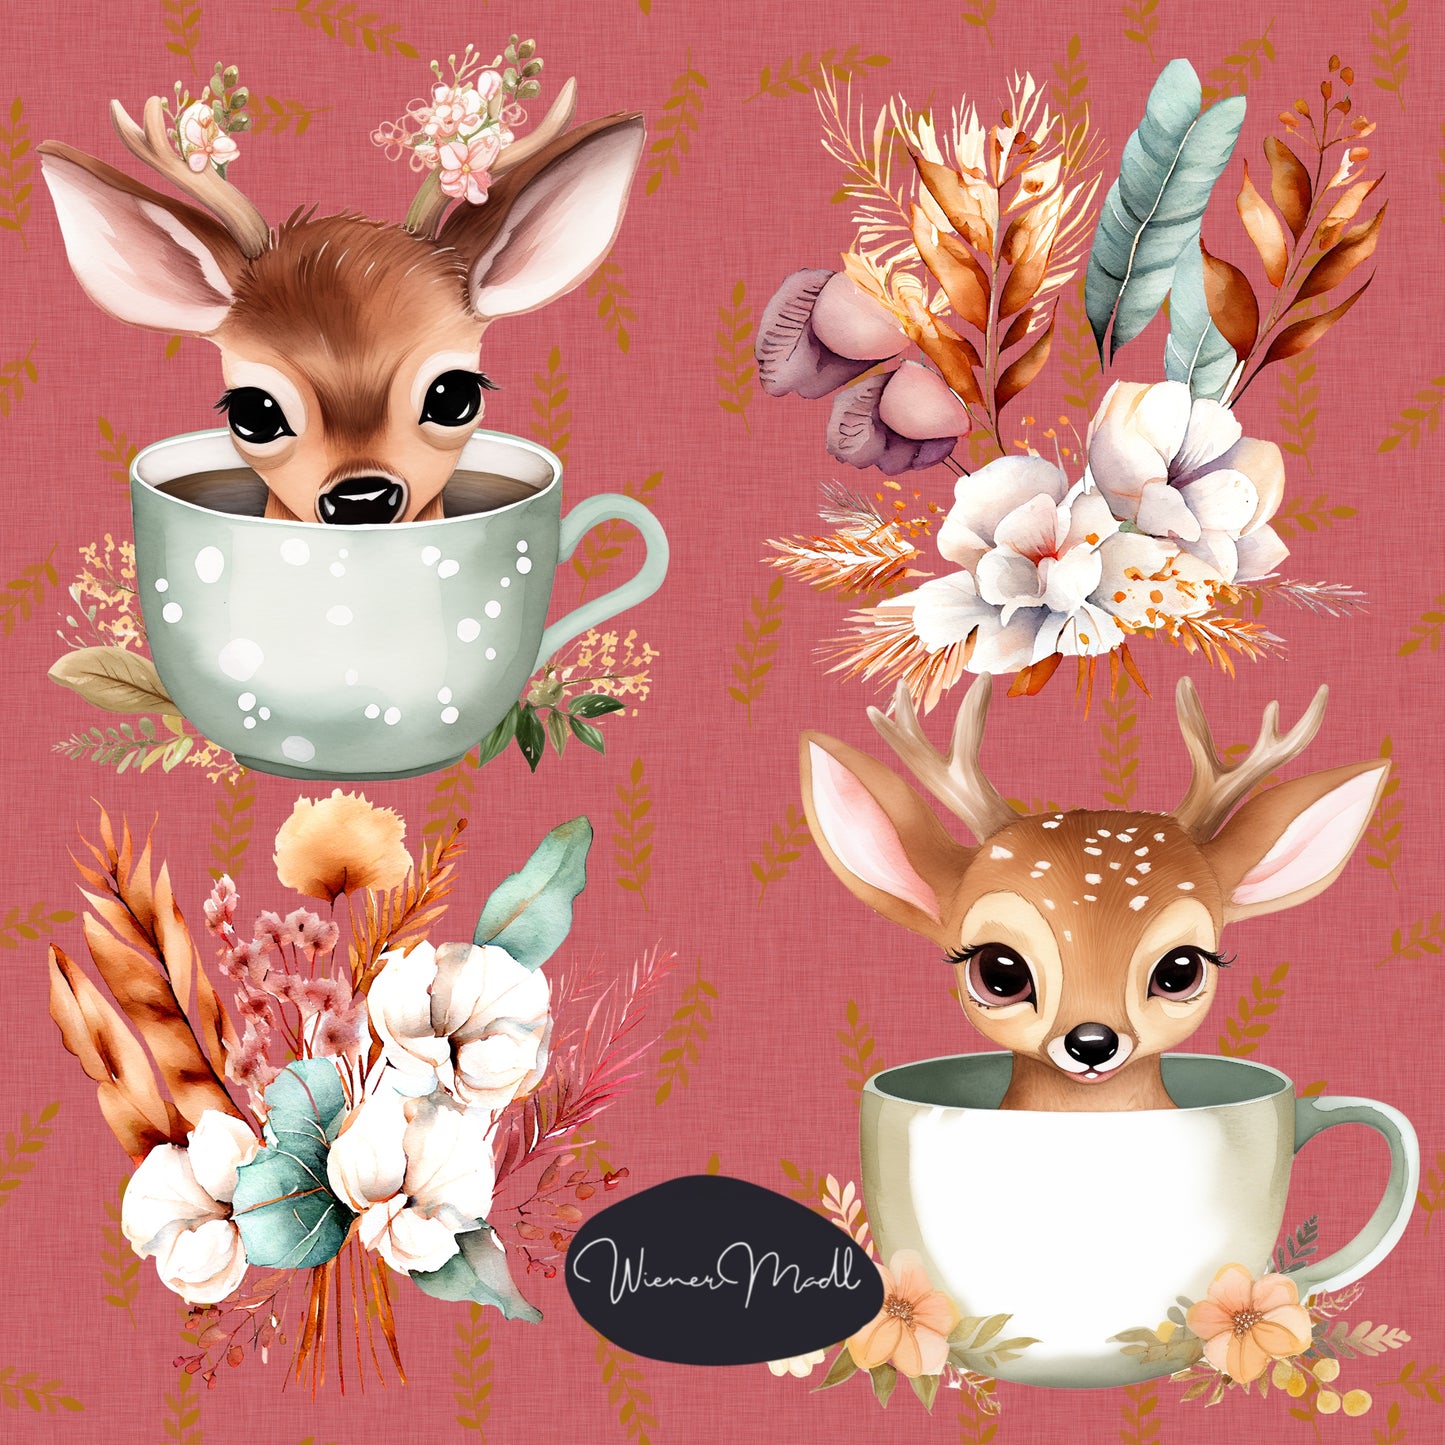 seamless repeat pattern - Oh deer!-non exclusive pattern